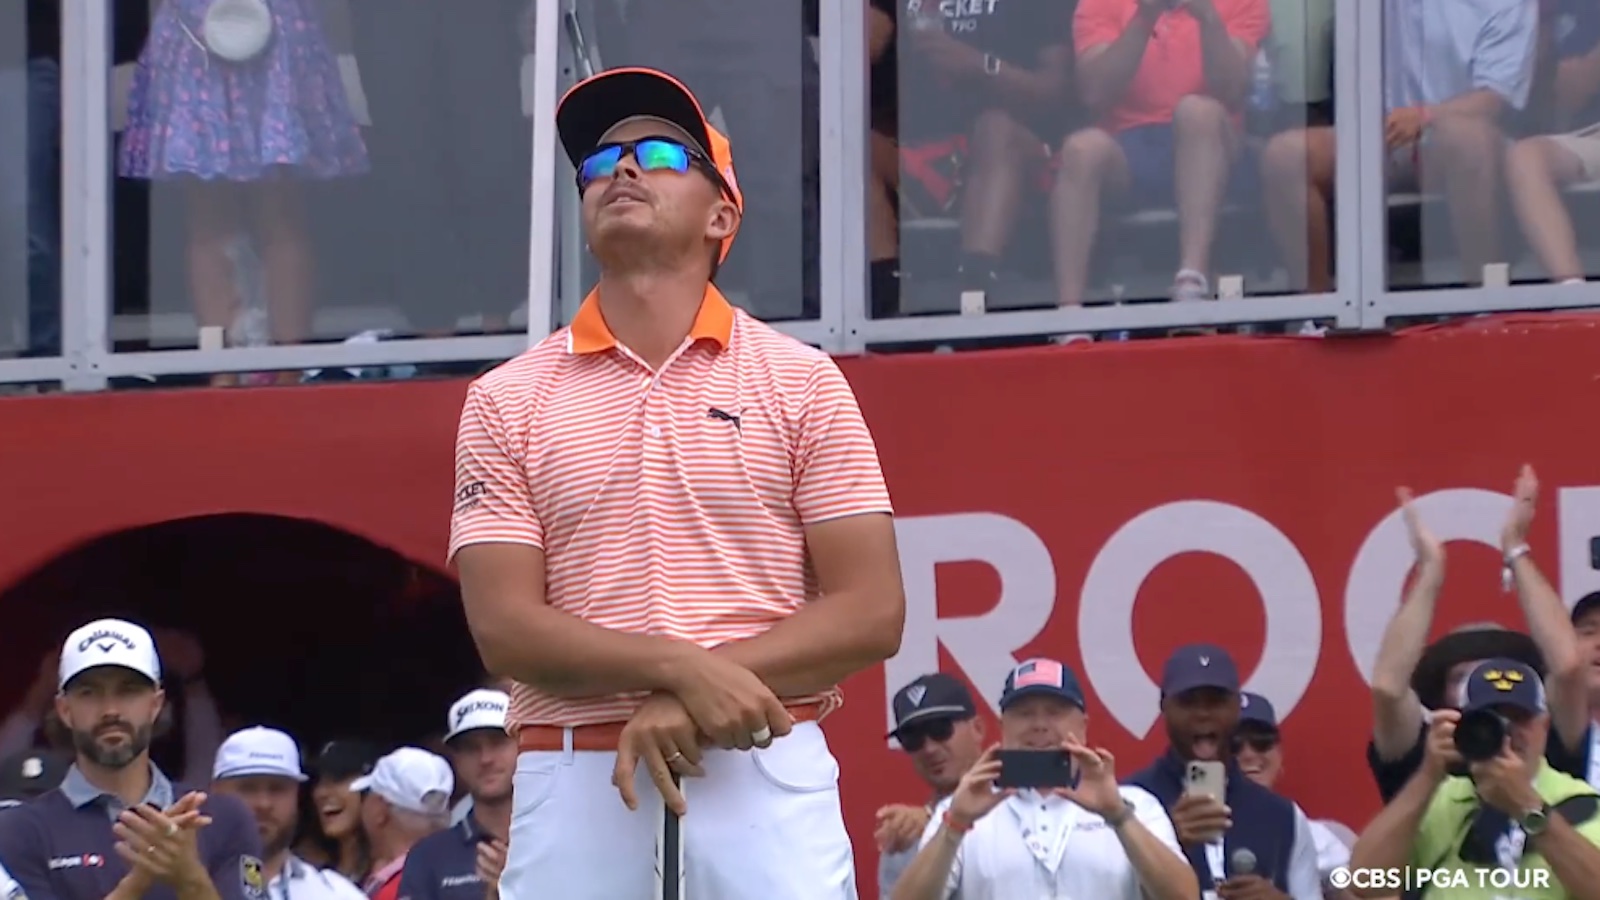 Rickie Fowler had awesome reaction after winning for first time since 2019